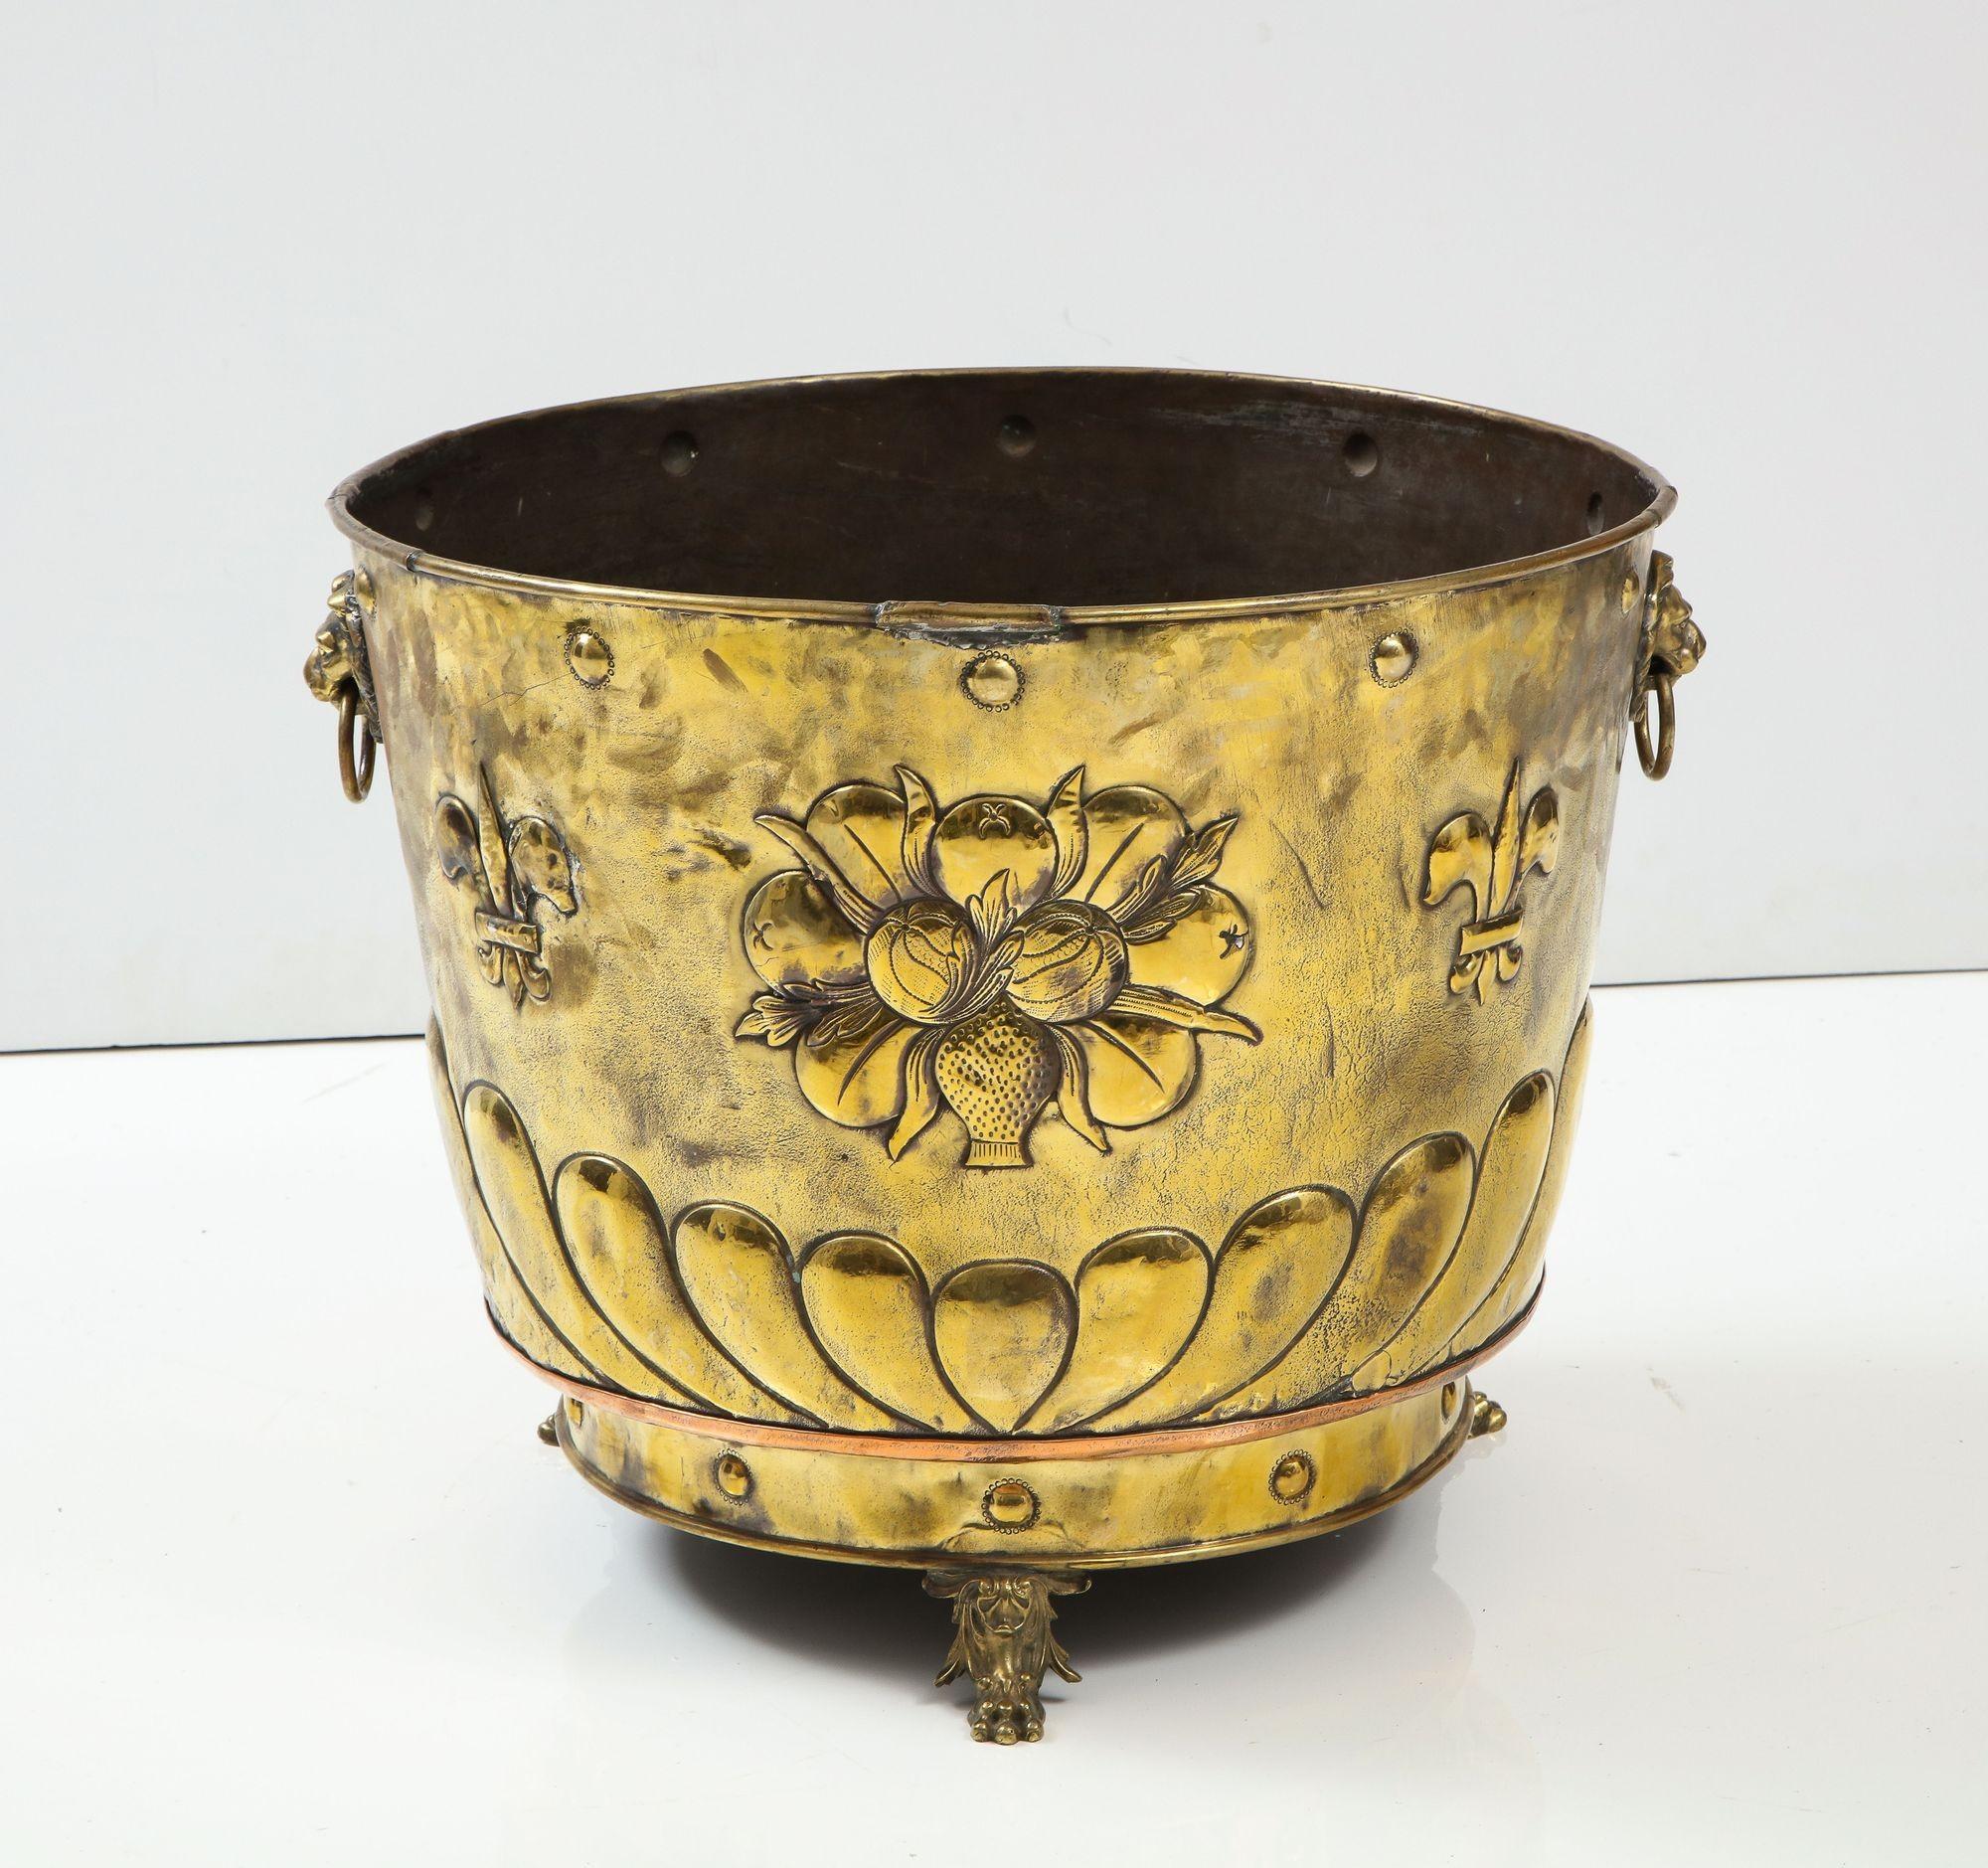 Baroque Large Brass Cauldron with Coat of Arms